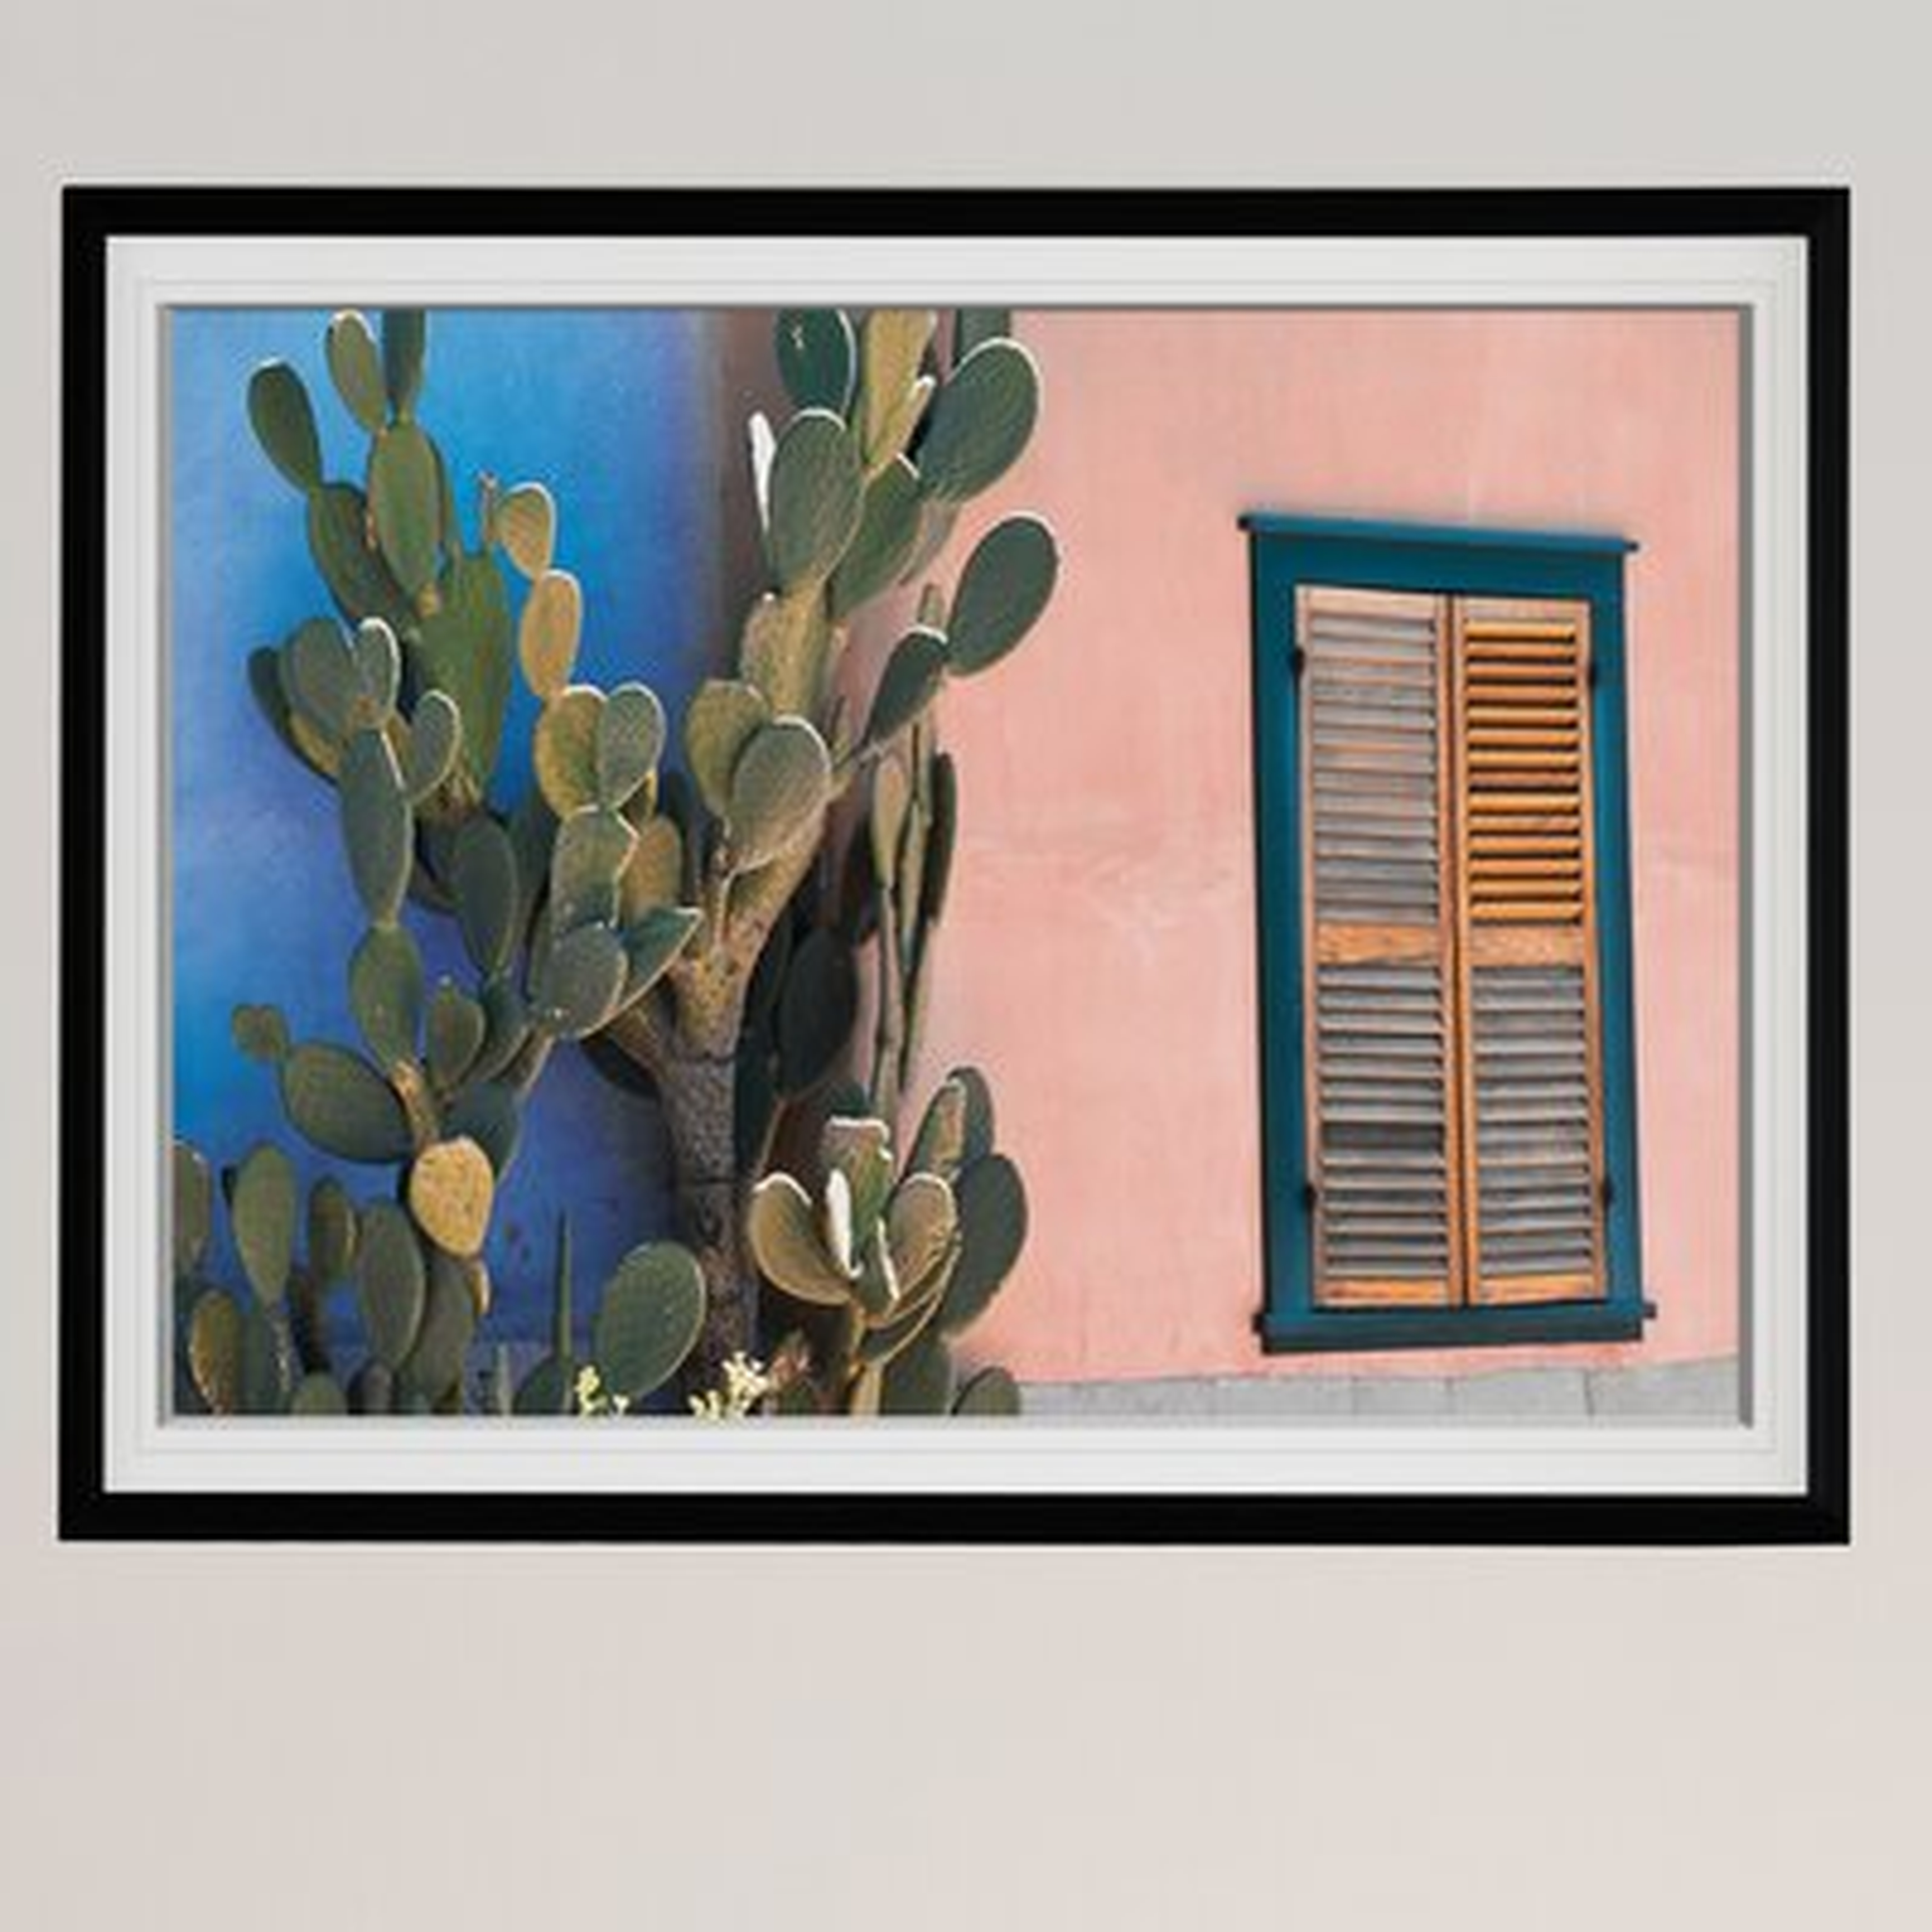 Cactus Profile - Picture Frame Photograph Print on Canvas - AllModern